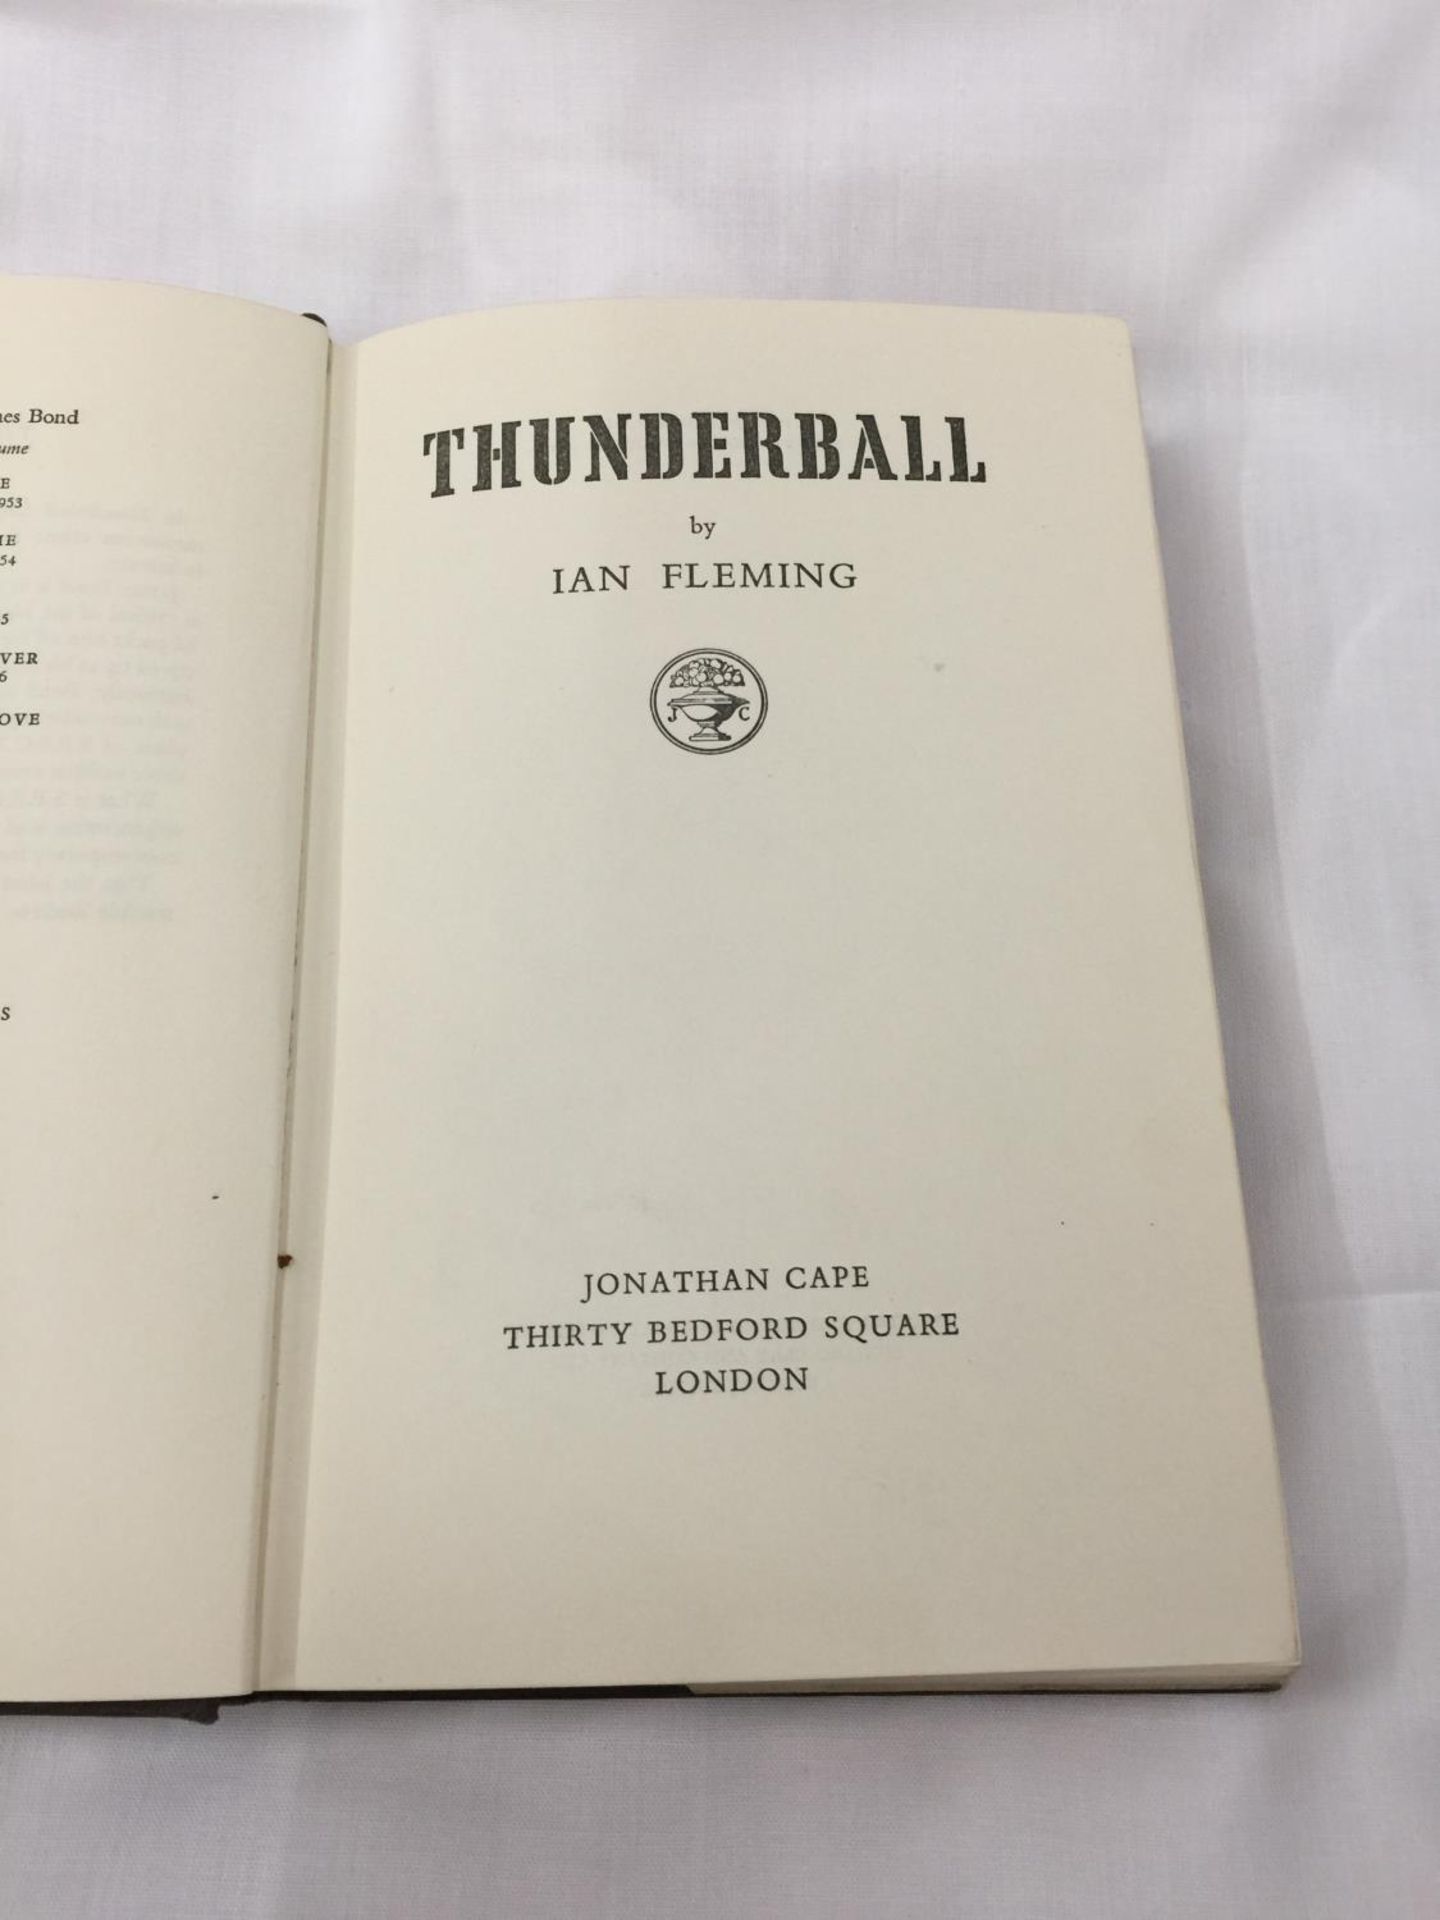 A FIRST EDITION JAMES BOND NOVEL - THUNDERBALL BY IAN FLEMING, HARDBACK WITH ORIGINAL DUST - Image 7 of 13